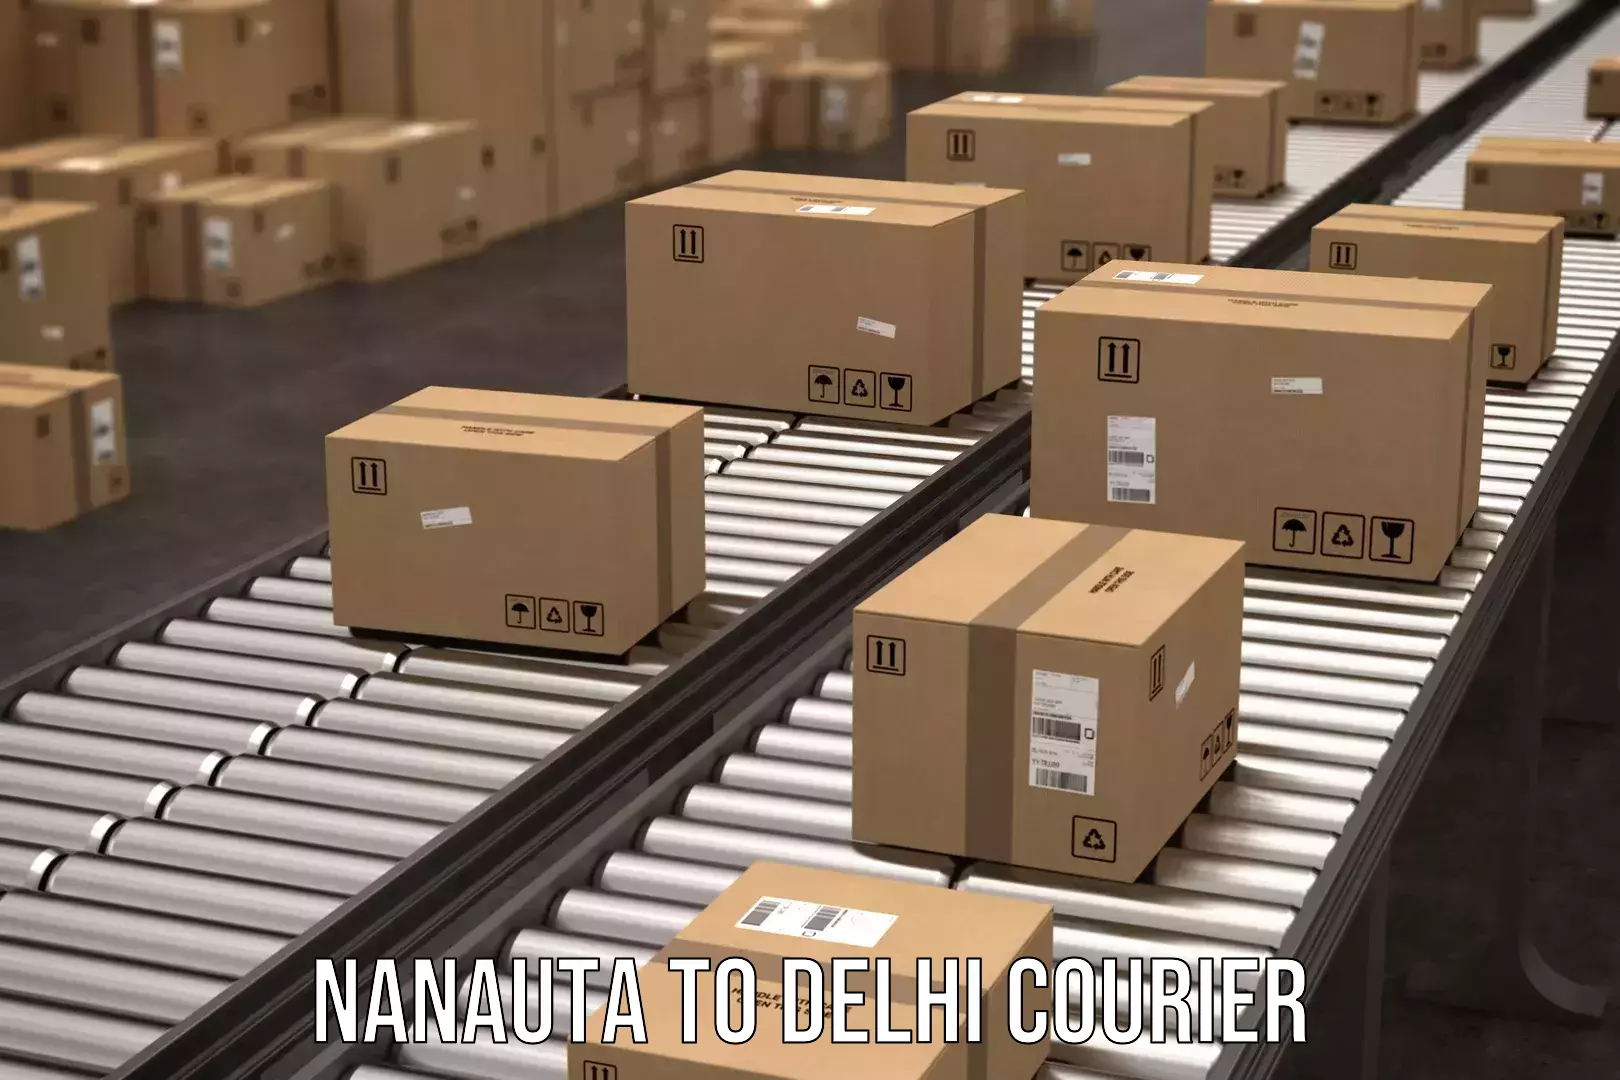 On-call courier service Nanauta to NCR